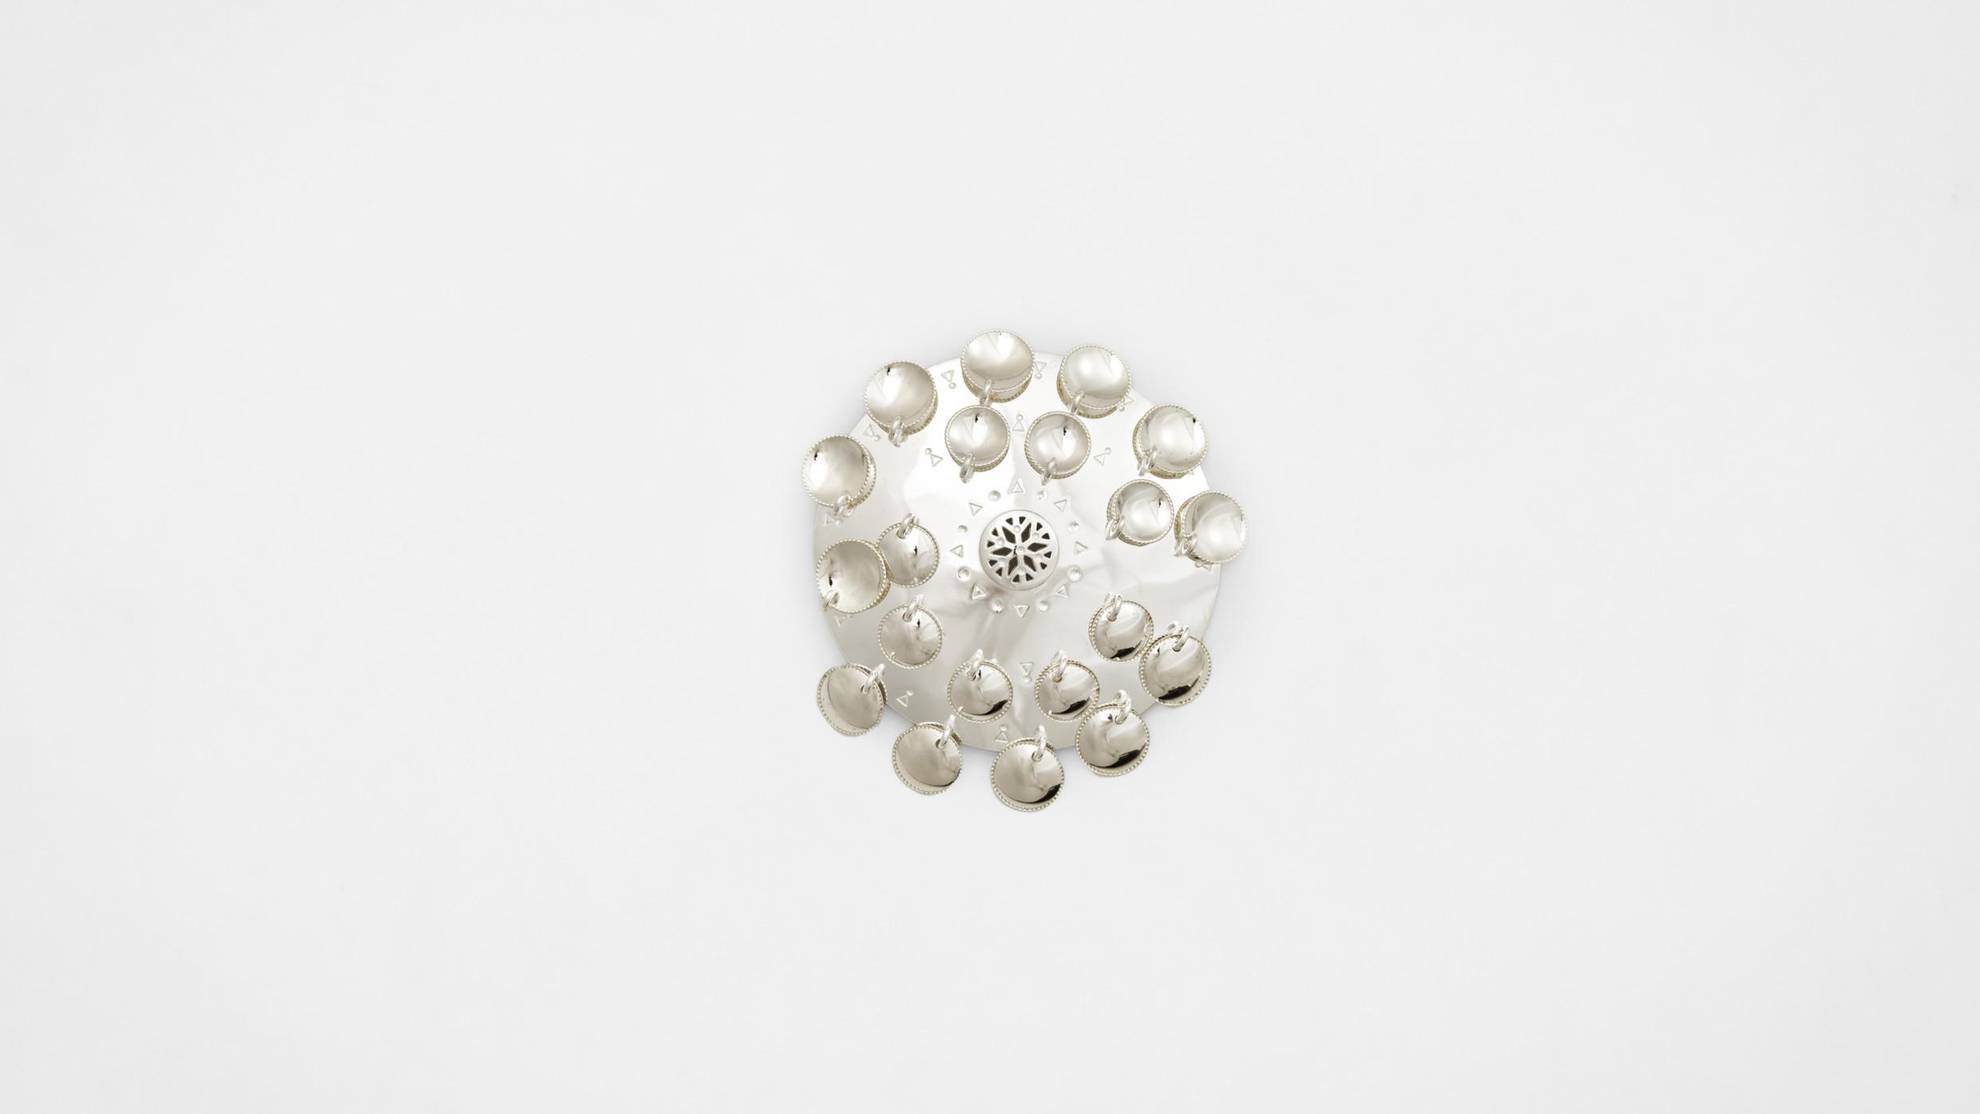 A brooch on a white surface.